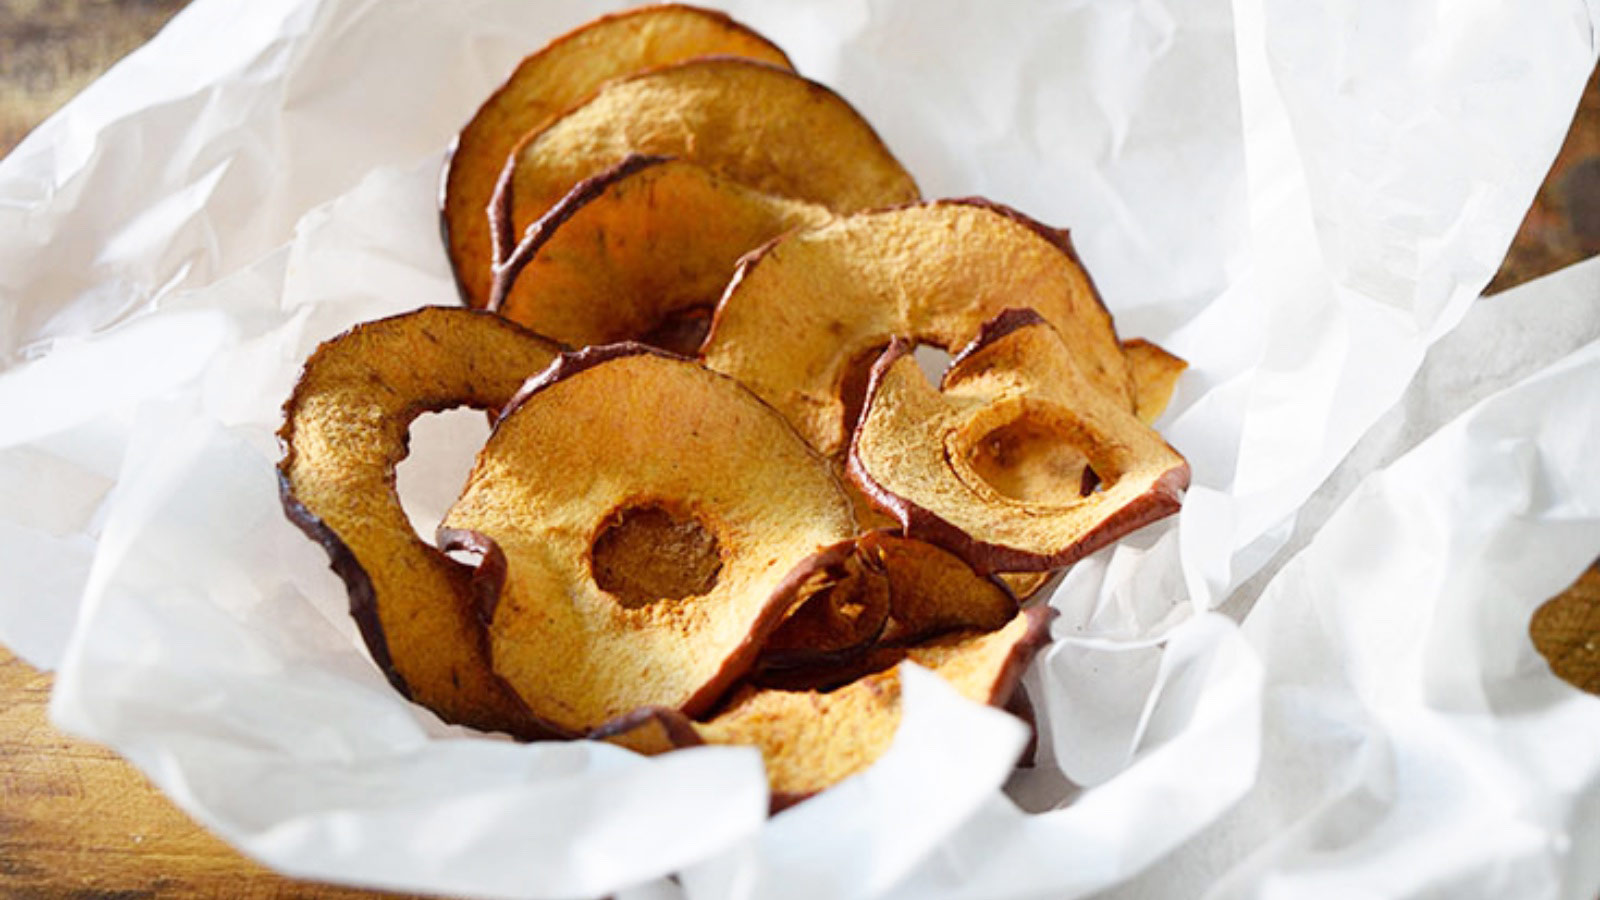 <p>Apple chips are sweet, crunchy, and full of fiber and apple flavor. Store-bought versions are pricey and likely contain ingredients you can’t pronounce and probably don’t want in your body. You don’t need the store-bought version with this easy air-fried <a href="https://www.thegraciouspantry.com/air-fryer-apple-chips-recipe/">apple chips</a> recipe. </p>